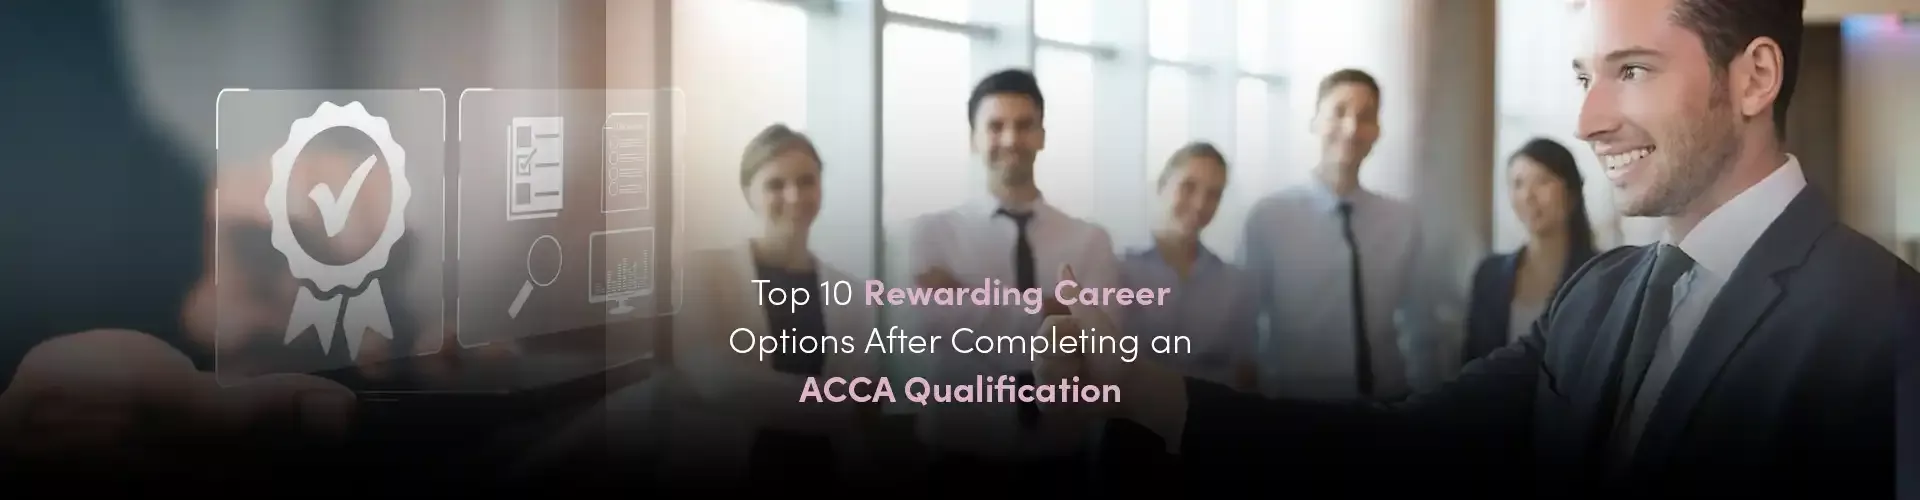 Top 10 Rewarding Career Options After Completing an ACCA Qualification